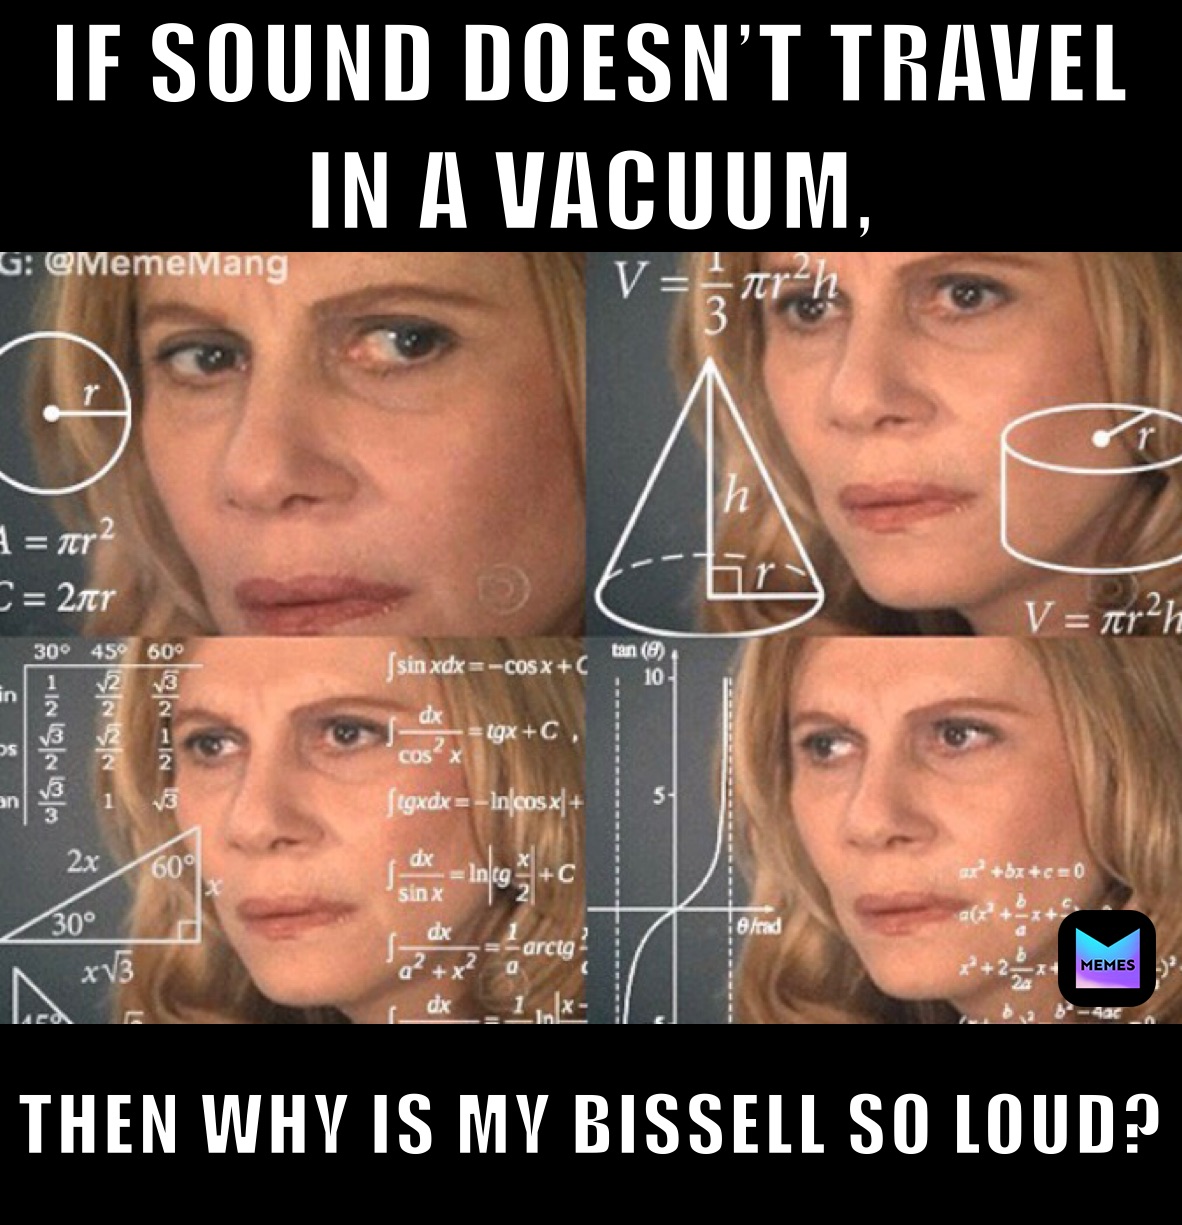 IF SOUND DOESN’T TRAVEL IN A VACUUM, THEN WHY IS MY BISSELL SO LOUD?